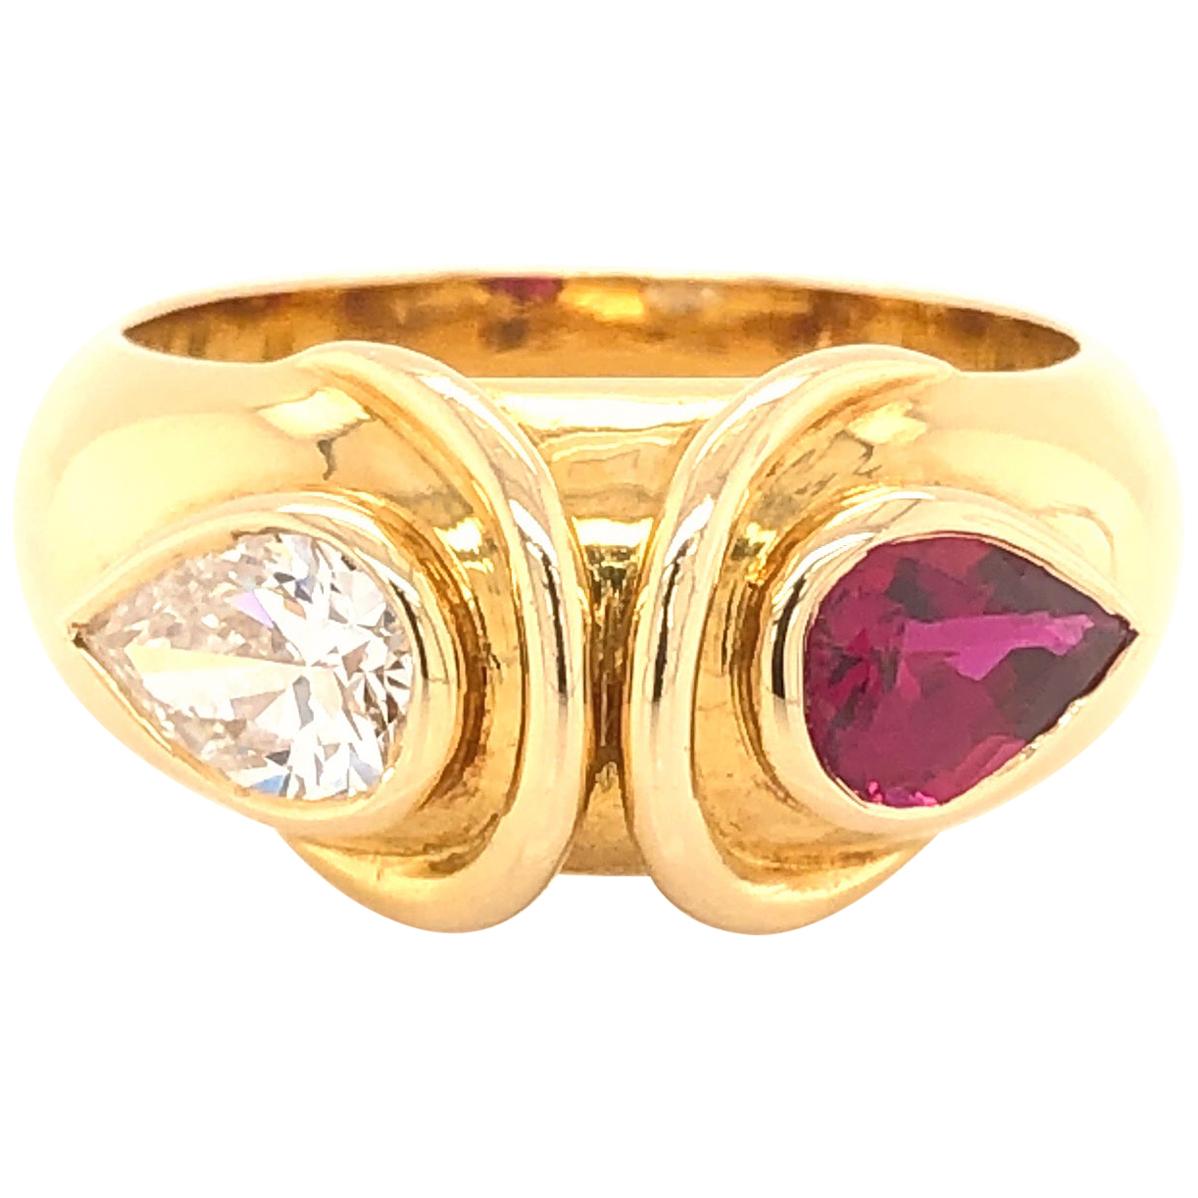 Fred Paris Diamond and Ruby Cocktail Ring 1.65 Carat